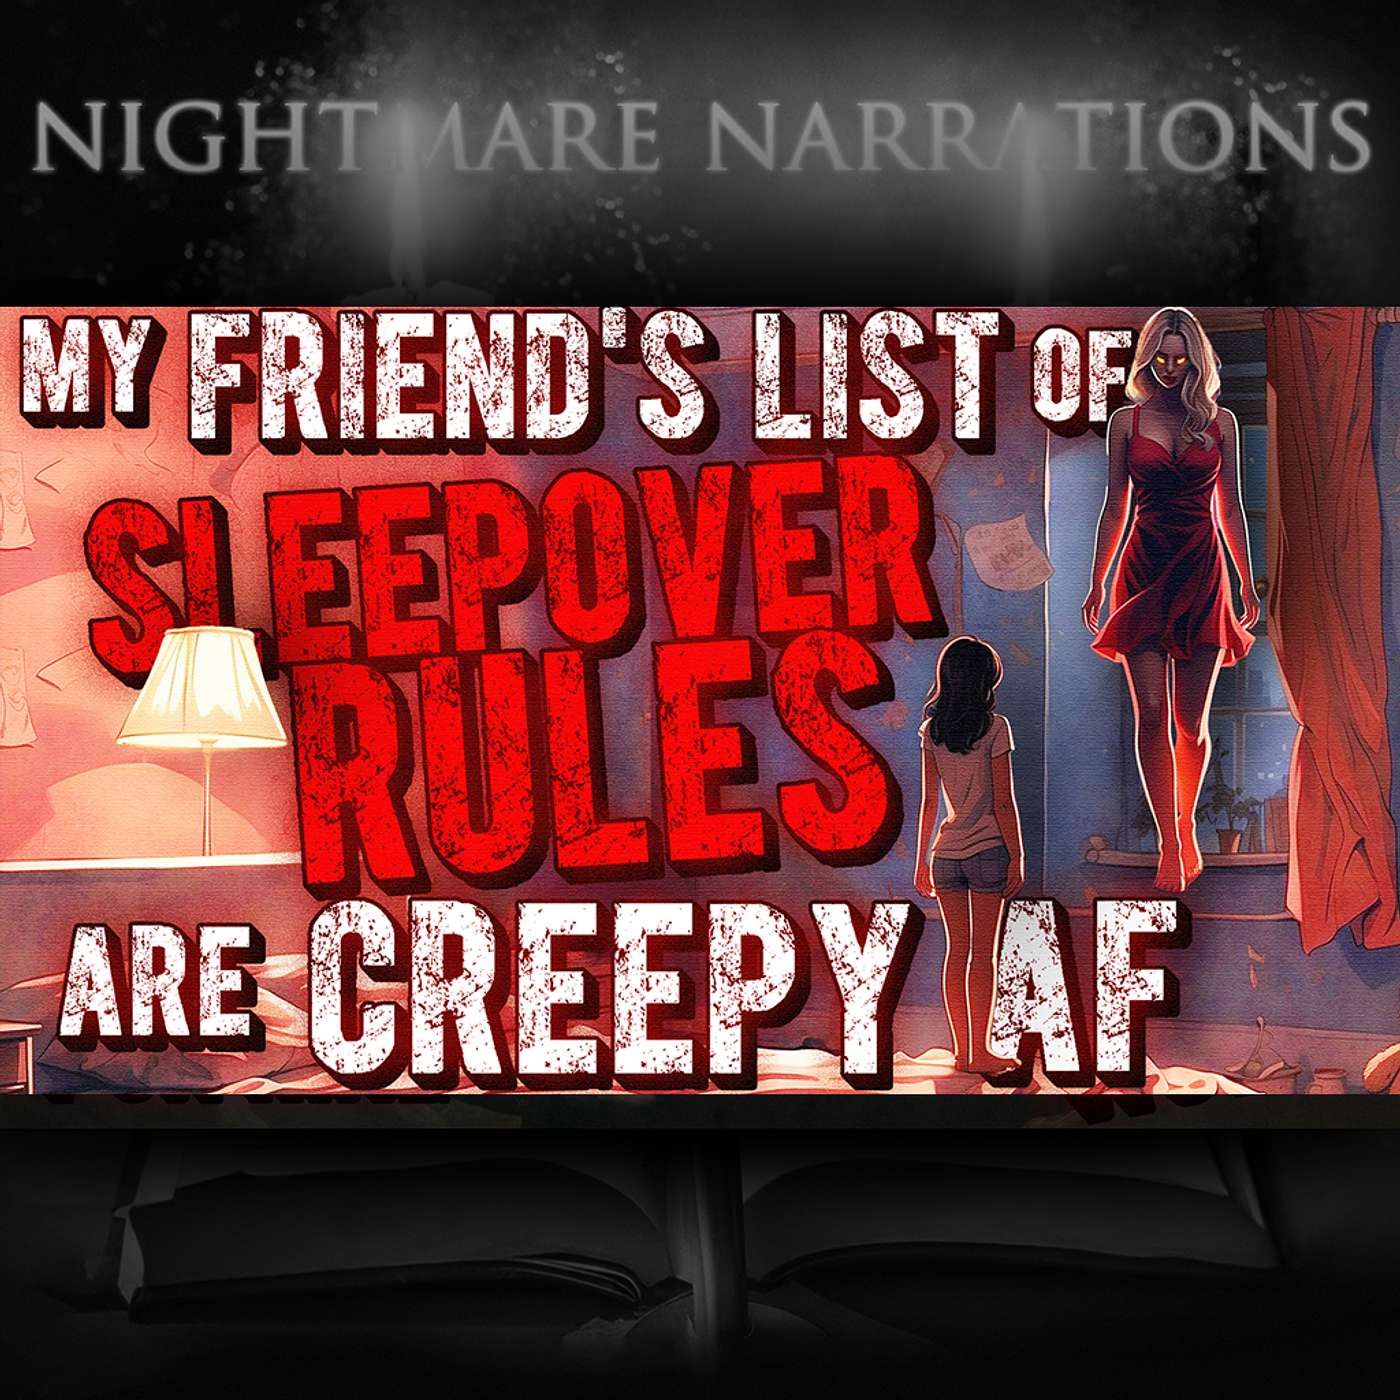 My Friend’s List of Sleepover Rules are Creepy AF - Chilling Reddit Story - Nightmare Narrations